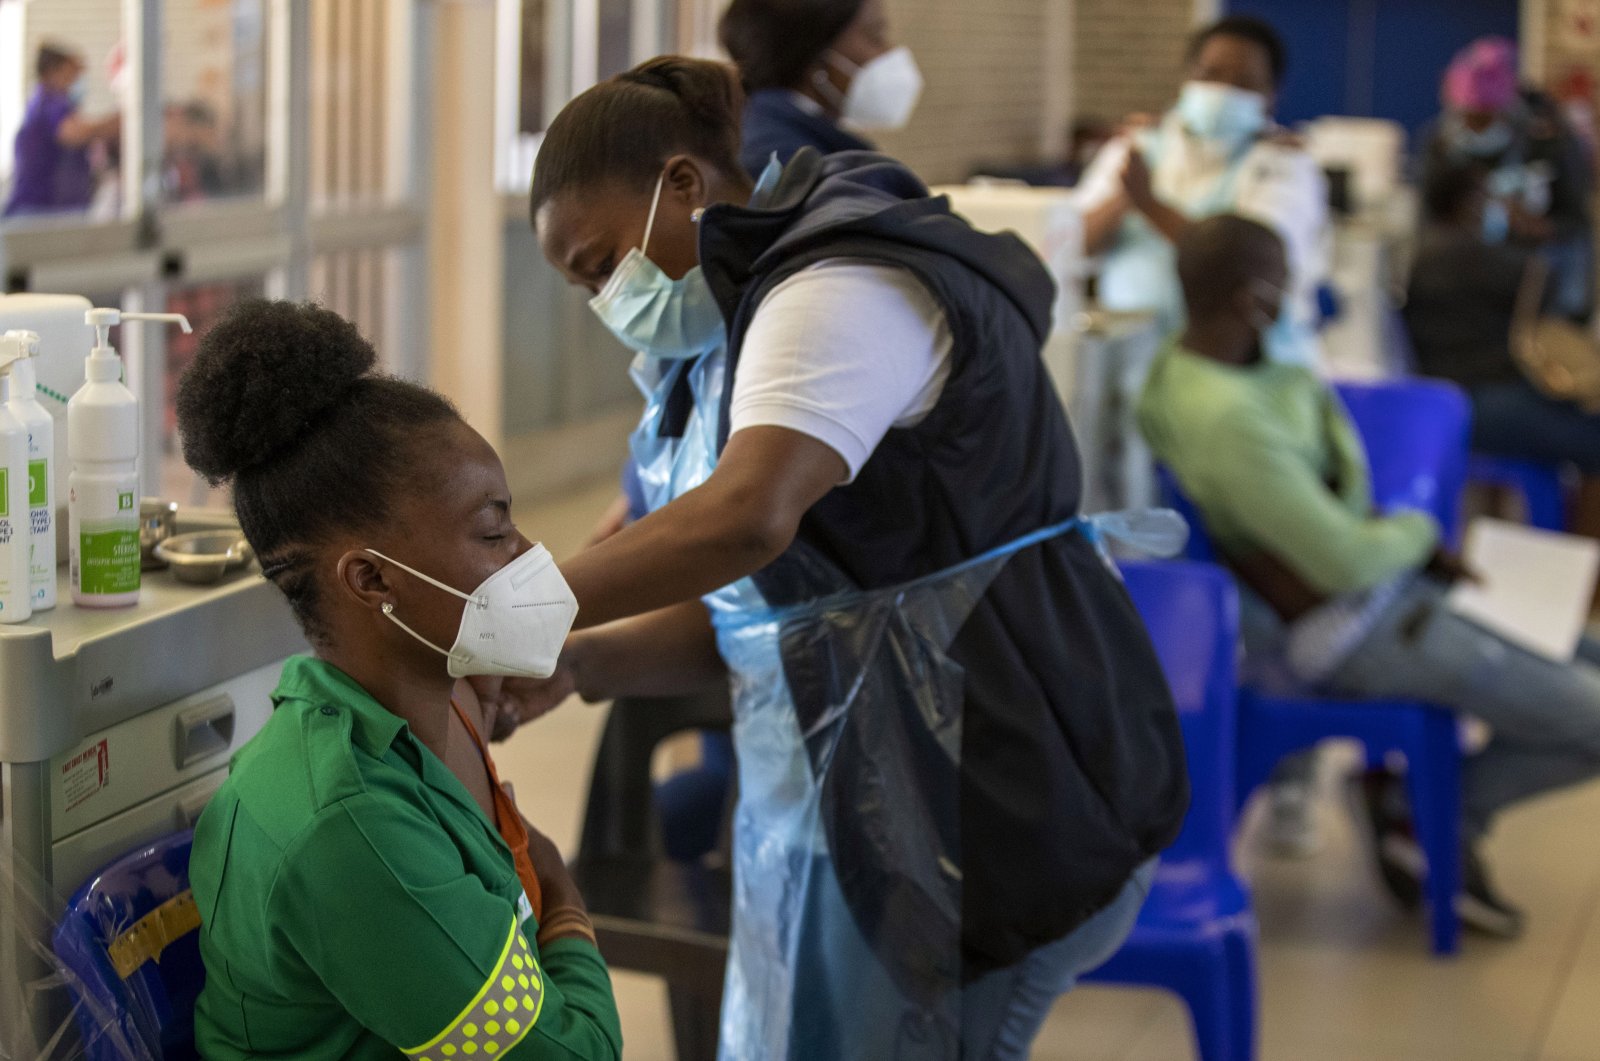 Khensani Chauke, a professional paramedic, receives a dose of Johnson & Johnson's COVID-19 vaccine from a health staff member during a vaccination day for health care workers at a vaccination center at Chris Hani Baragwanath Academic Hospital in Johannesburg, South Africa, March 26, 2021. (AP Photo)